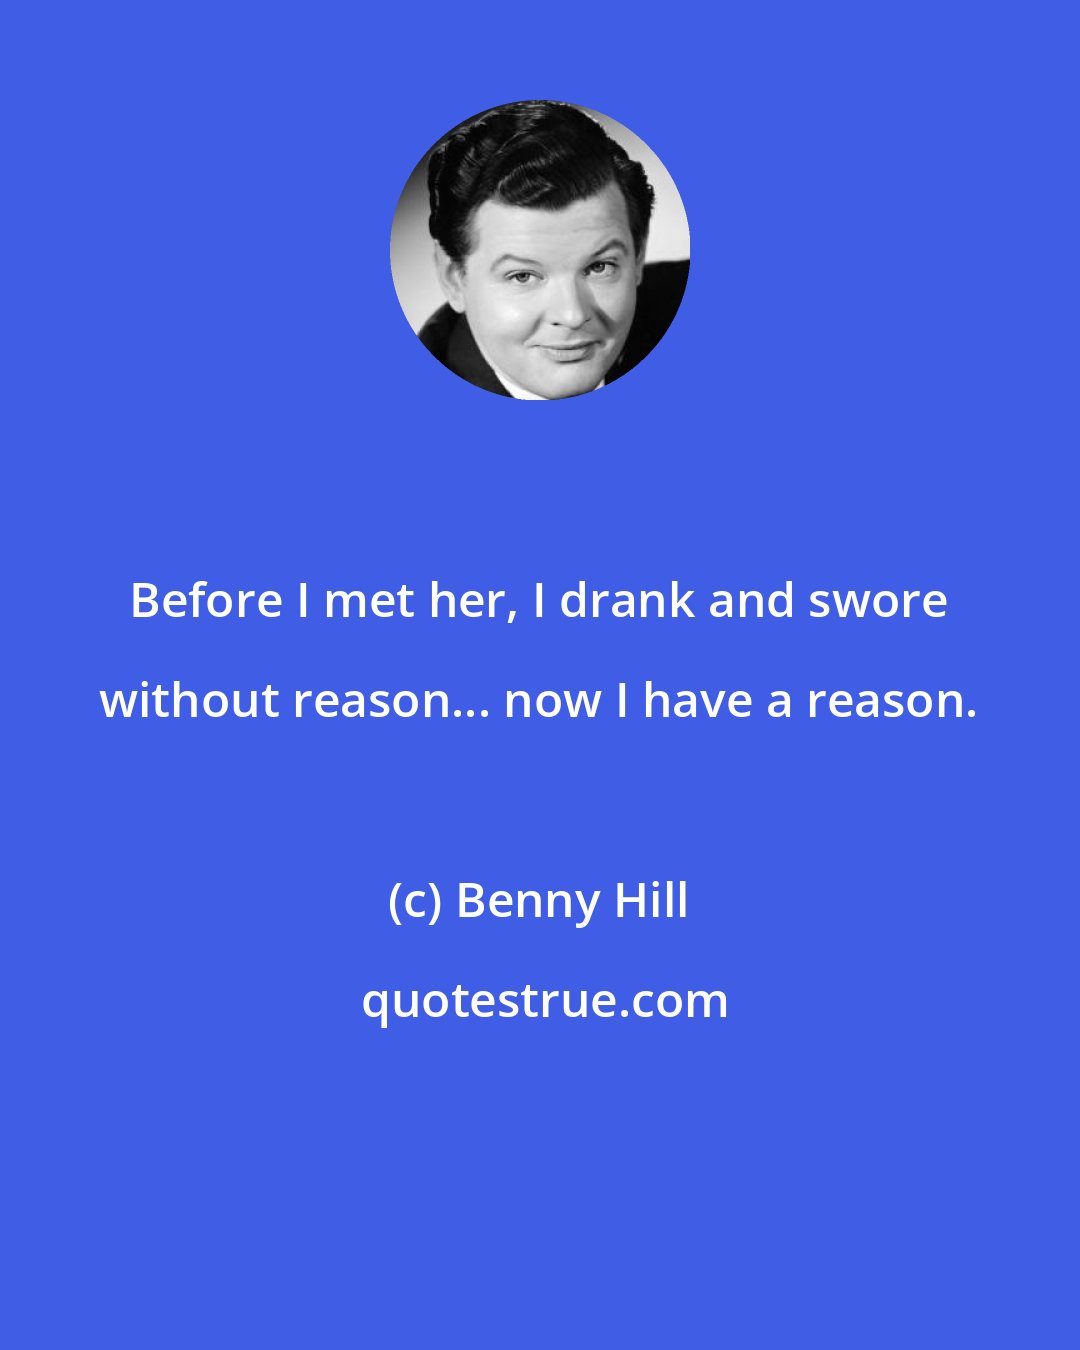 Benny Hill: Before I met her, I drank and swore without reason... now I have a reason.